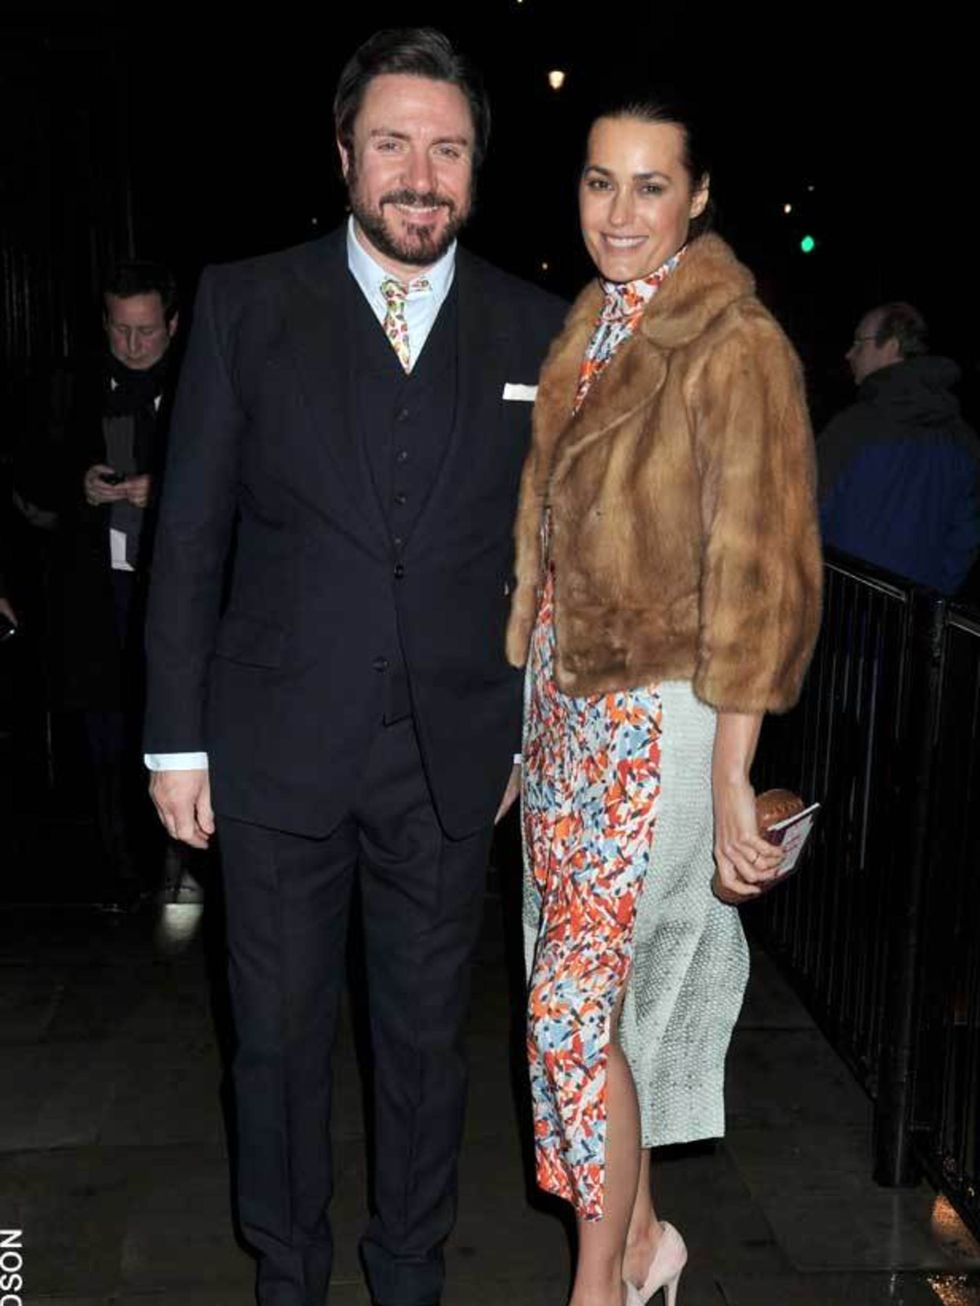 <p><a href="http://www.elleuk.com/starstyle/celebrity-trends/%28section%29/everyone-s-wearing-british-designers/%28offset%29/0/%28img%29/700620">Yasmin le Bon</a> &amp; Simon le Bon at a Downing Street party, 21 February 2011</p>